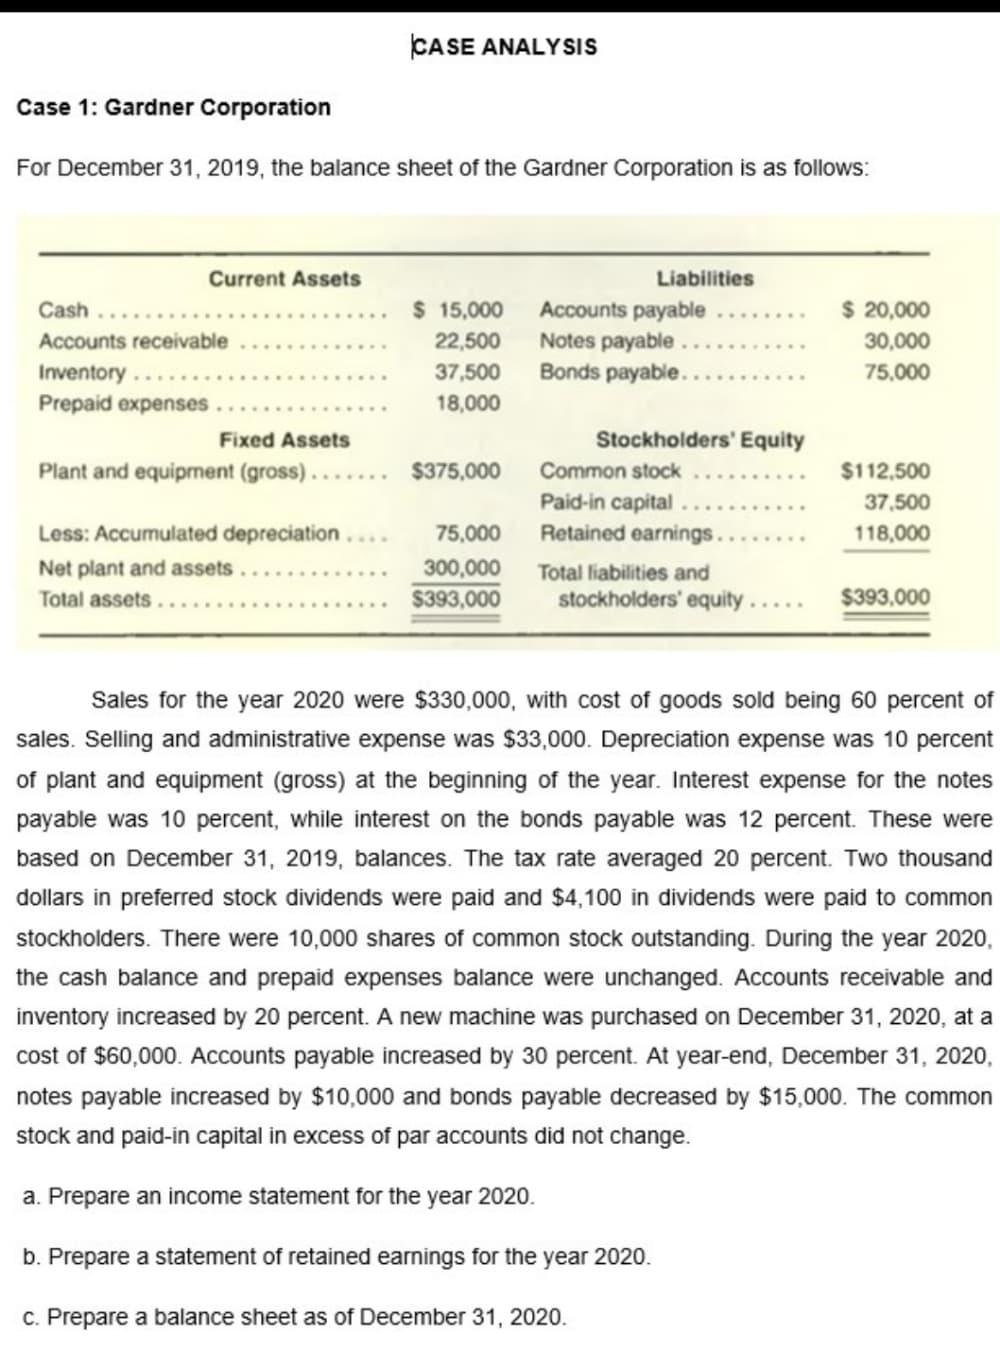 CASE ANALYSIS
Case 1: Gardner Corporation
For December 31, 2019, the balance sheet of the Gardner Corporation is as follows:
Current Assets
Liabilities
Cash
$ 15,000
Accounts payable
$ 20,000
Accounts receivable
22,500
Notes payable
30,000
Inventory.
37,500
Bonds payable..
75,000
Prepaid expenses
18,000
Fixed Assets
Stockholders' Equity
Plant and equipment (gross).......
$375,000
Common stock
$112,500
Paid-in capital
37,500
Retained earnings.
Less: Accumulated depreciation..
Net plant and assets....
Total assets...
75,000
118,000
300,000
Total liabilities and
$393,000
stockholders' equity.....
$393,000
Sales for the year 2020 were $330,000, with cost of goods sold being 60 percent of
sales. Selling and administrative expense was $33,000. Depreciation expense was 10 percent
of plant and equipment (gross) at the beginning of the year. Interest expense for the notes
payable was 10 percent, while interest on the bonds payable was 12 percent. These were
based on December 31, 2019, balances. The tax rate averaged 20 percent. Two thousand
dollars in preferred stock dividends were paid and $4,100 in dividends were paid to common
stockholders. There were 10,000 shares of common stock outstanding. During the year 2020,
the cash balance and prepaid expenses balance were unchanged. Accounts receivable and
inventory increased by 20 percent. A new machine was purchased on December 31, 2020, at a
cost of $60,000. Accounts payable increased by 30 percent. At year-end, December 31, 2020,
notes payable increased by $10,000 and bonds payable decreased by $15,000. The common
stock and paid-in capital in excess of par accounts did not change.
a. Prepare an income statement for the year 2020.
b. Prepare a statement of retained earnings for the year 2020.
c. Prepare a balance sheet as of December 31, 2020.
